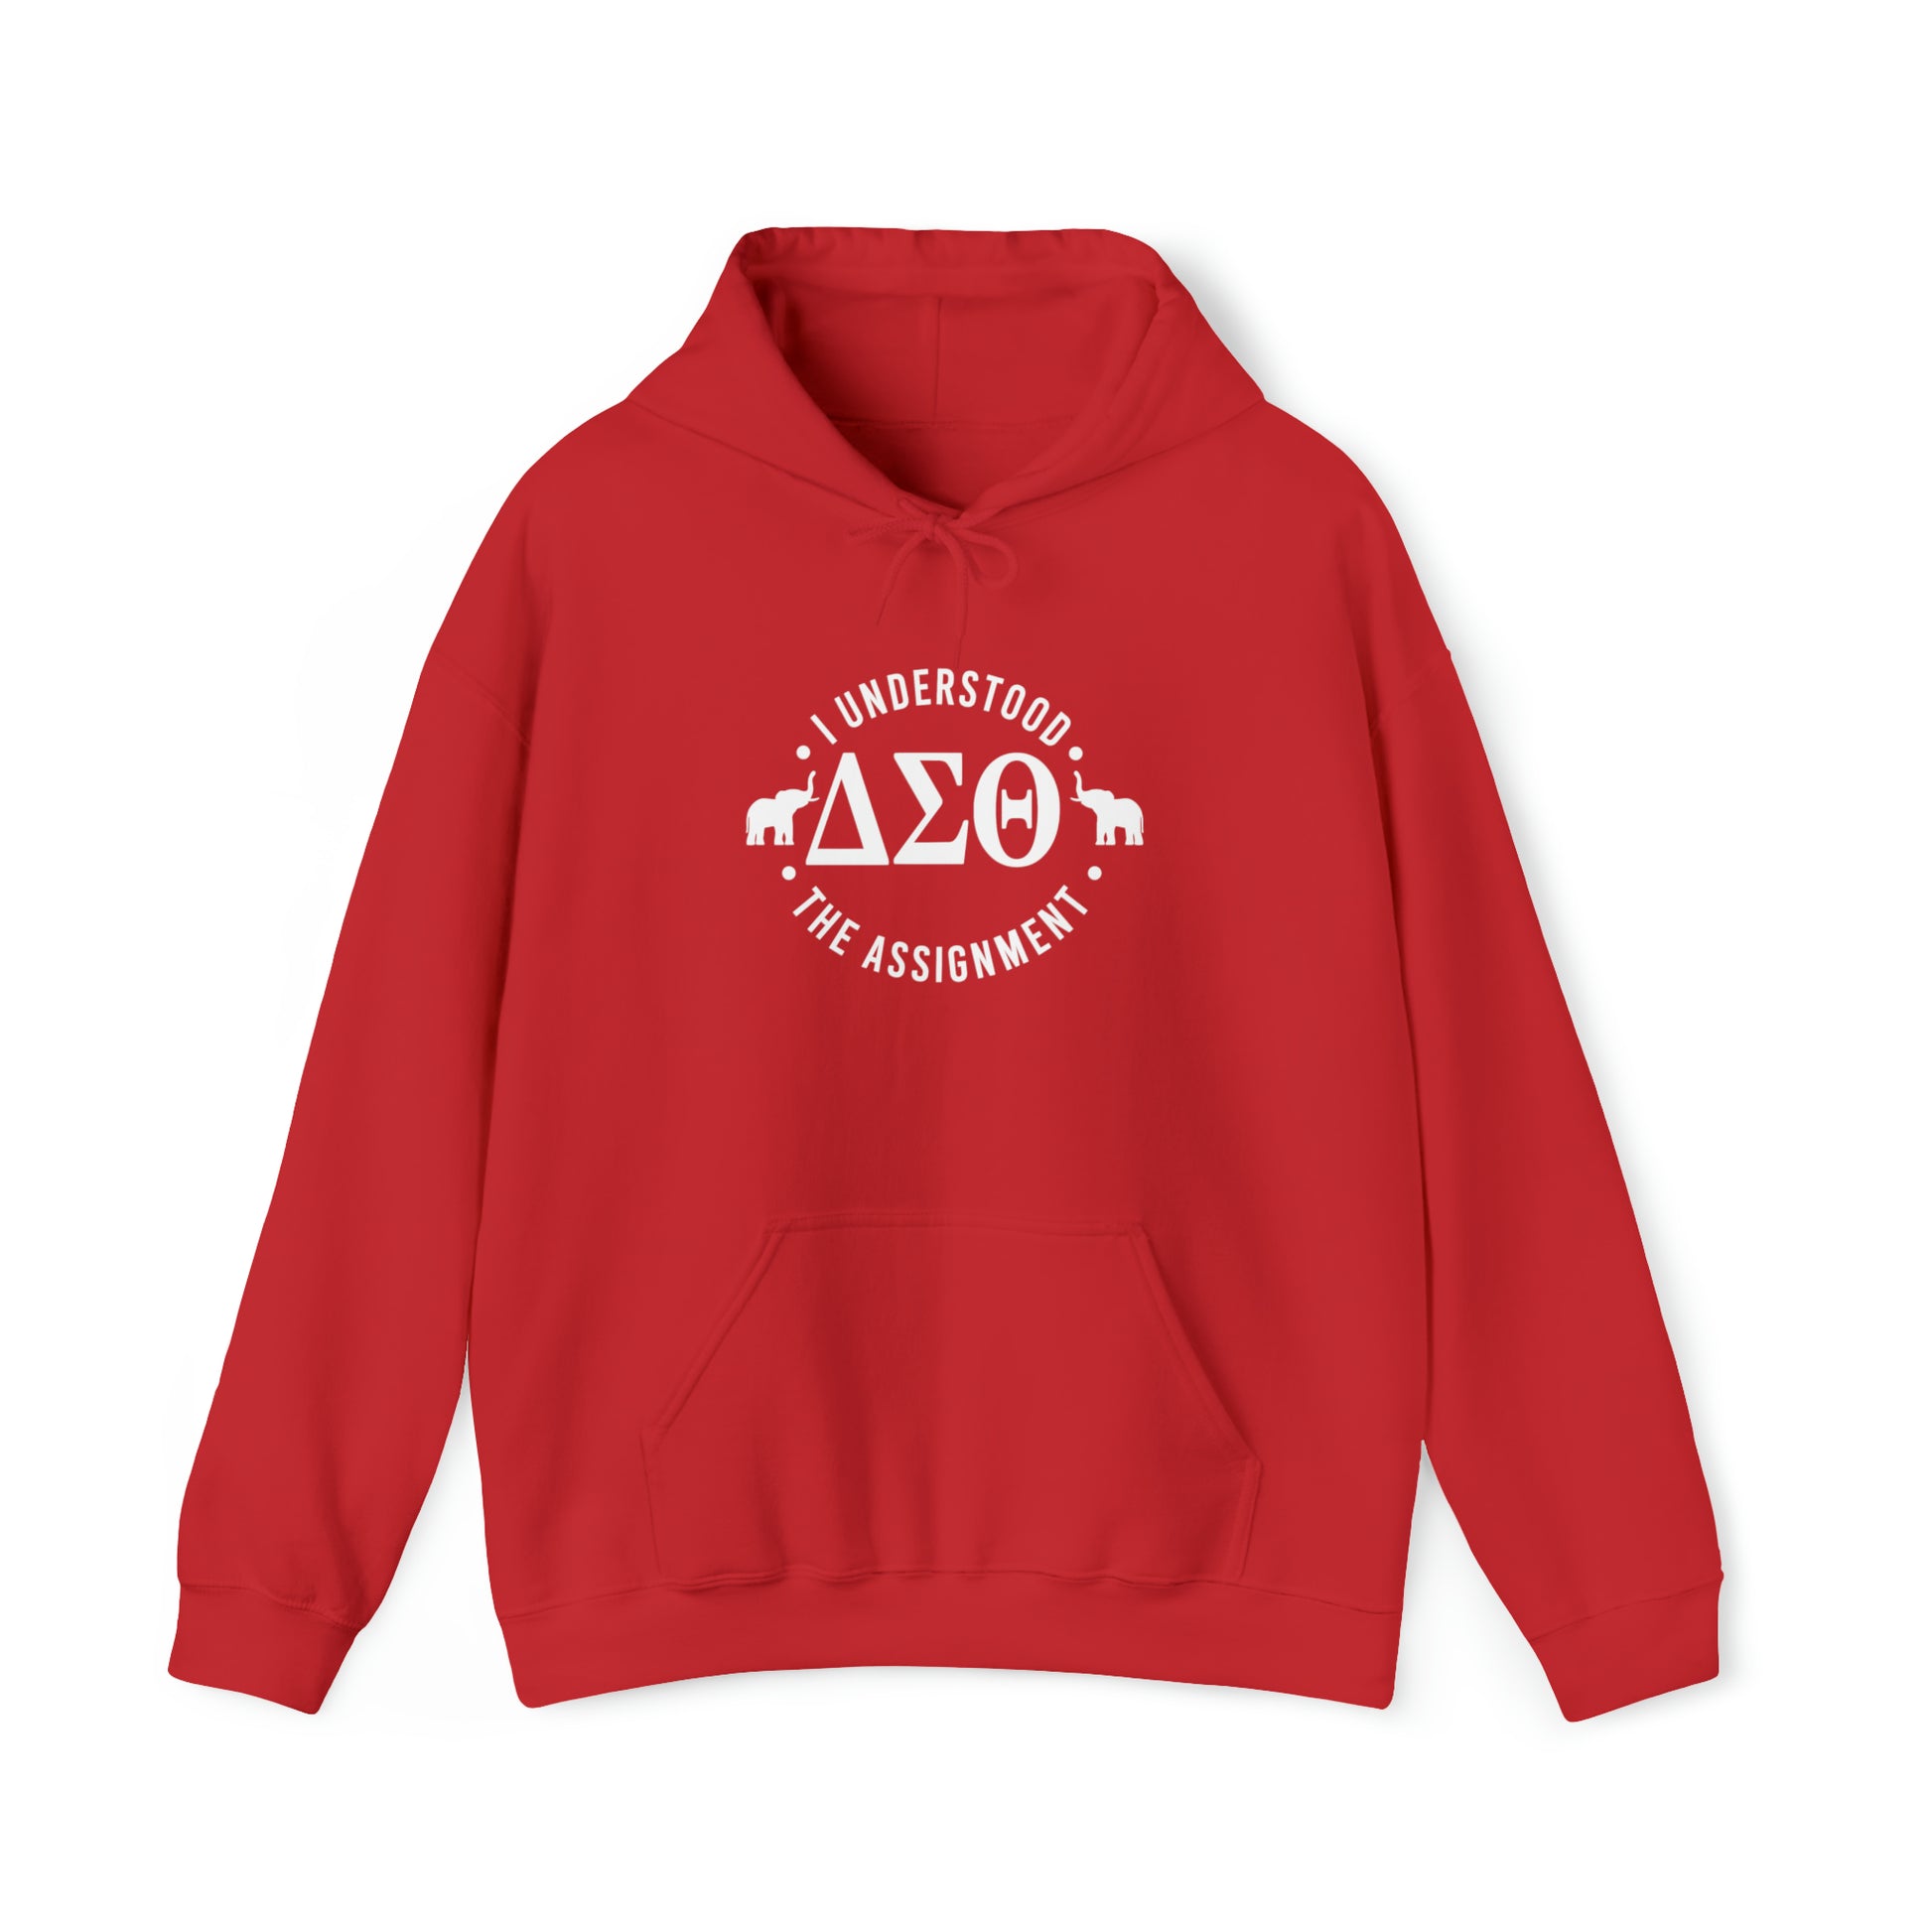 Red Heavy Blend Hooded Sweatshirt Delta Sigma Theta Sorority Red Sweatshirt with white writing, " I understood the assignment." with elephants & Greek letters